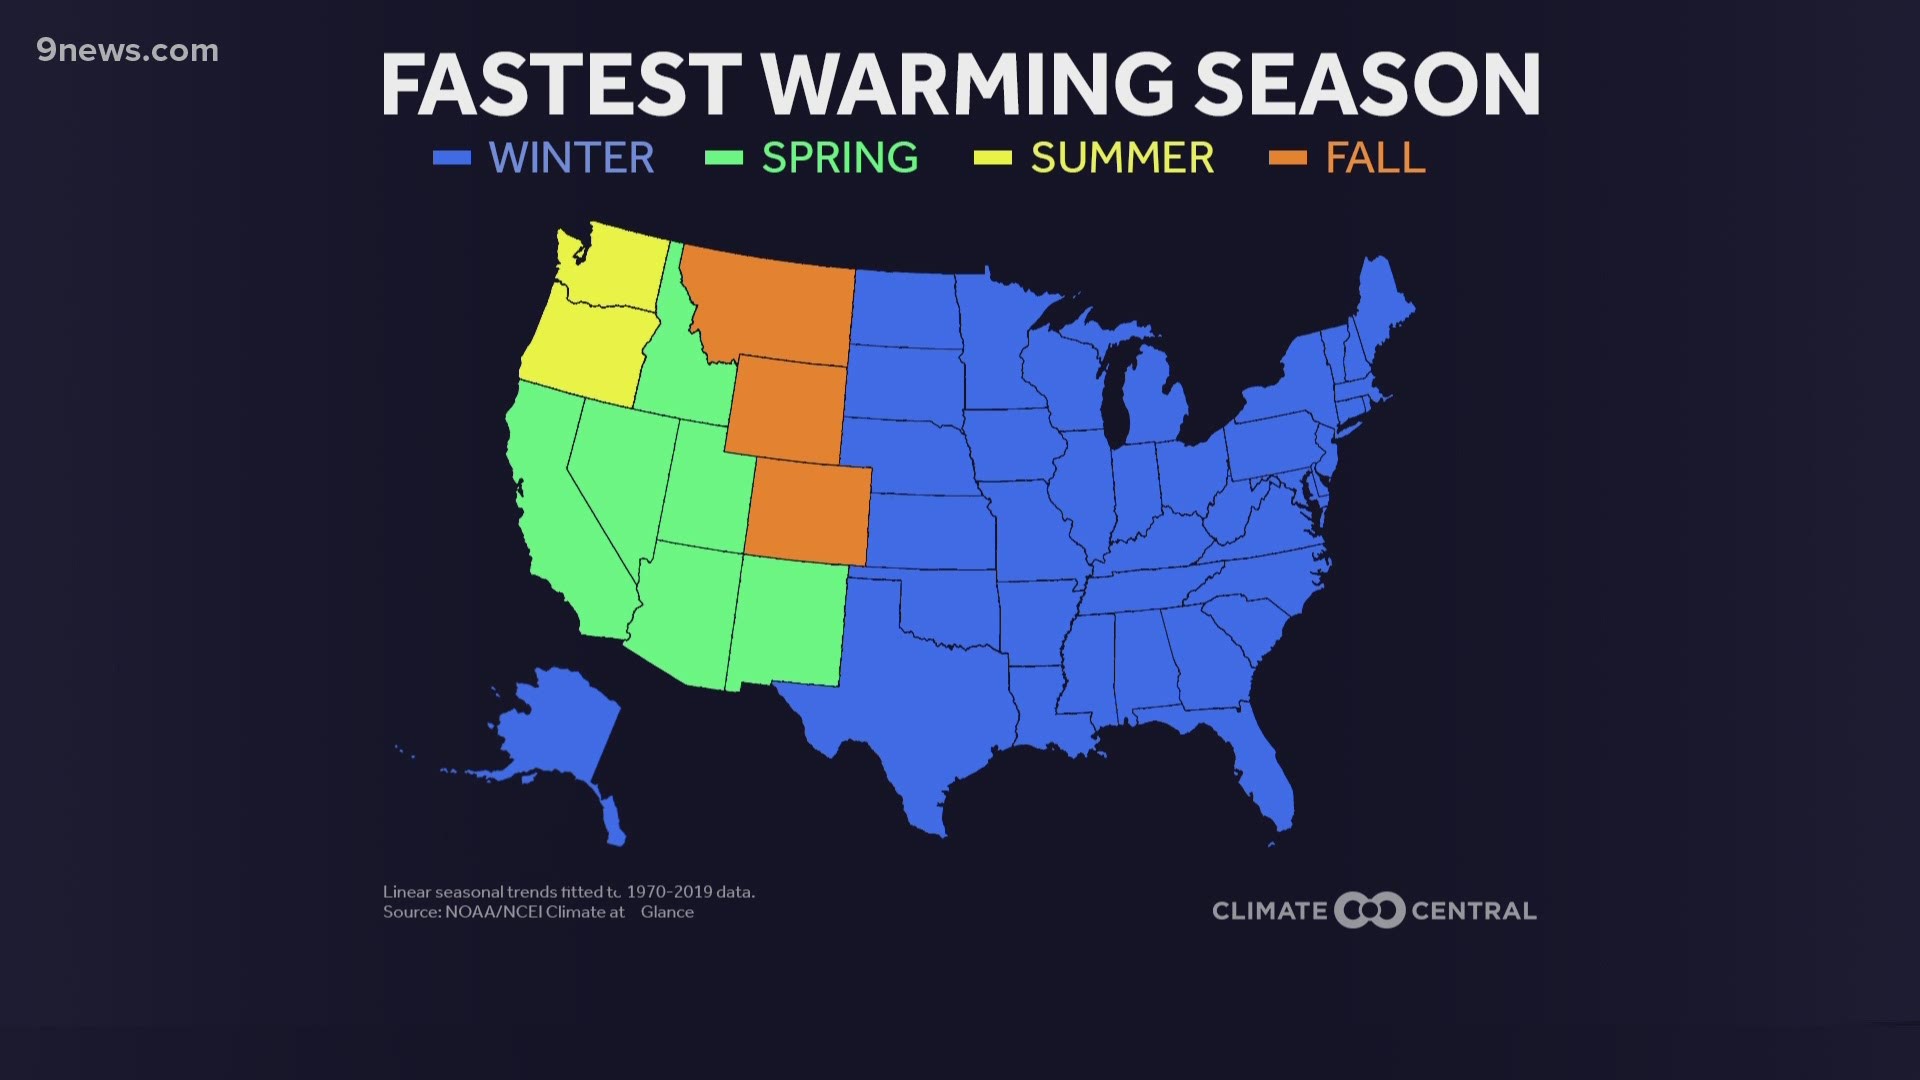 All the seasons in Colorado are showing some warming, but fall is proving to be showing it the most.